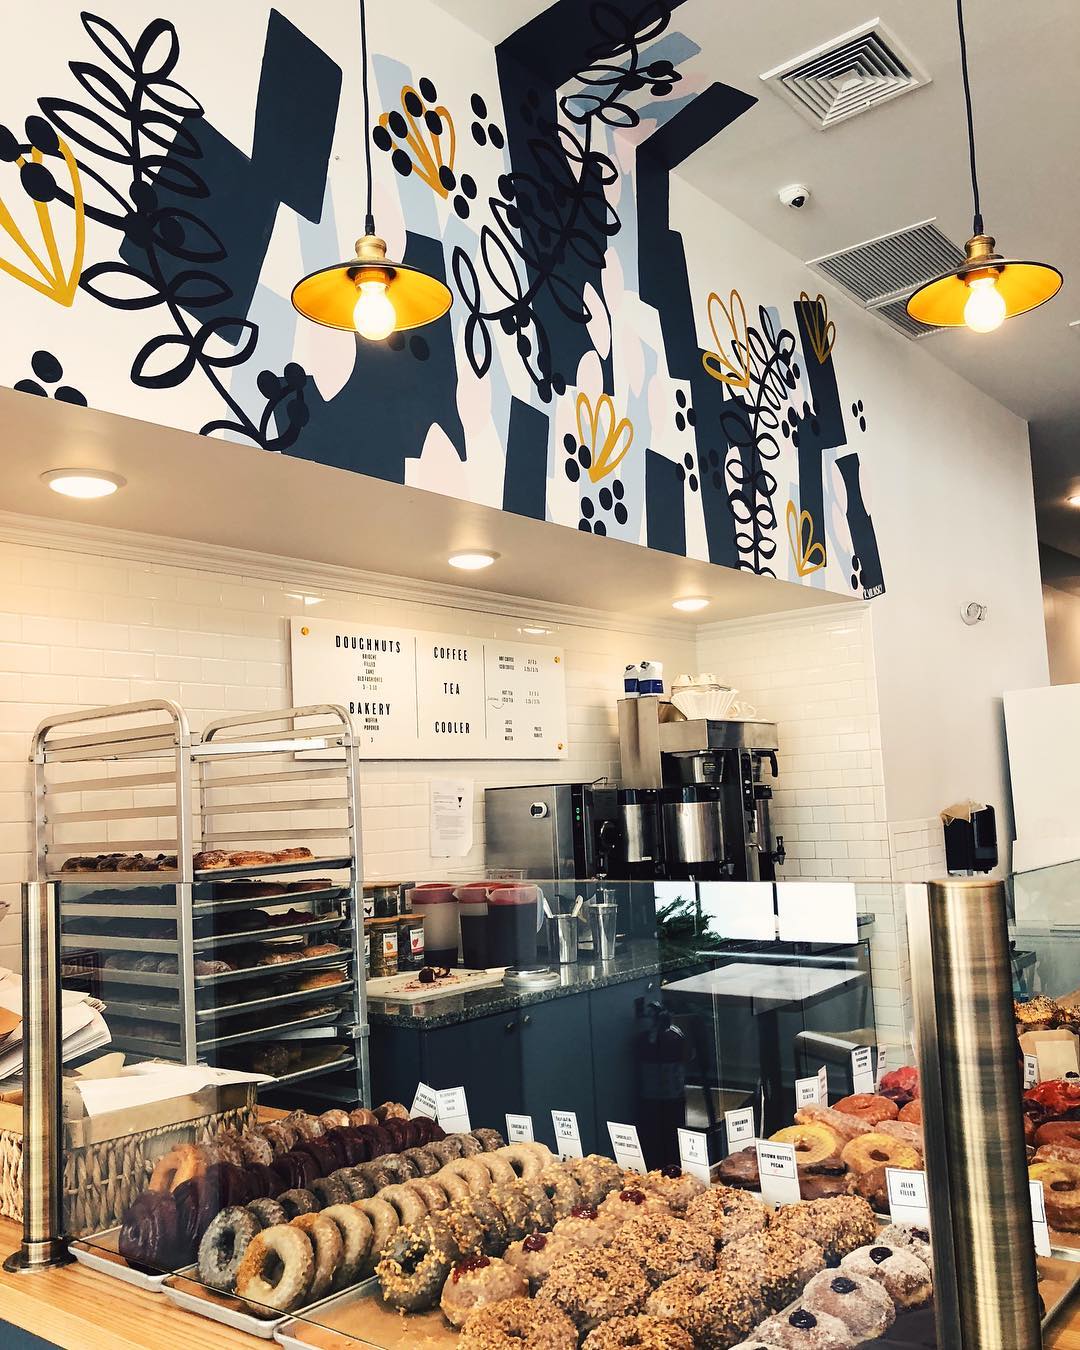  Commissioned mural for Knead Doughnuts at 32 Custom House in Providence, Rhode Island. This piece was designed and painted by hand in May 2018.     